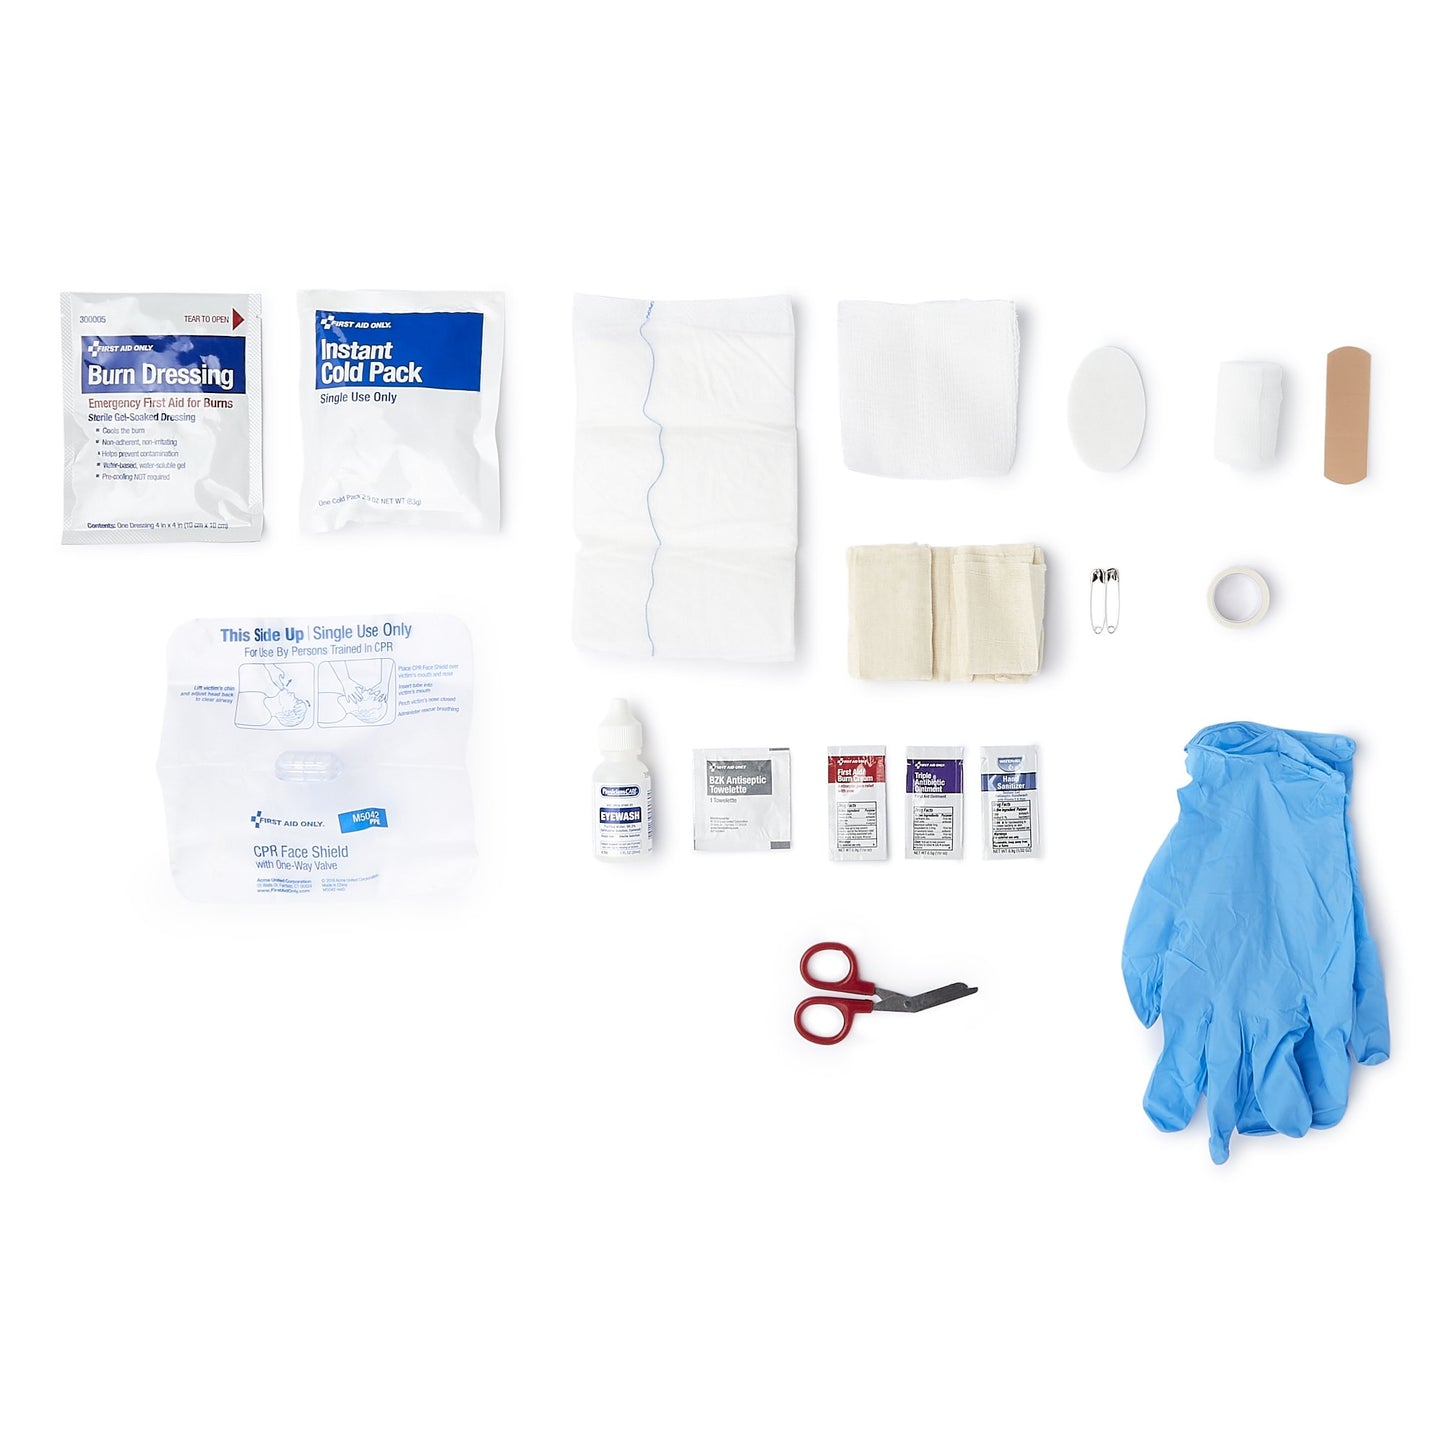 MooreBrand 10 Person First Aid Kit